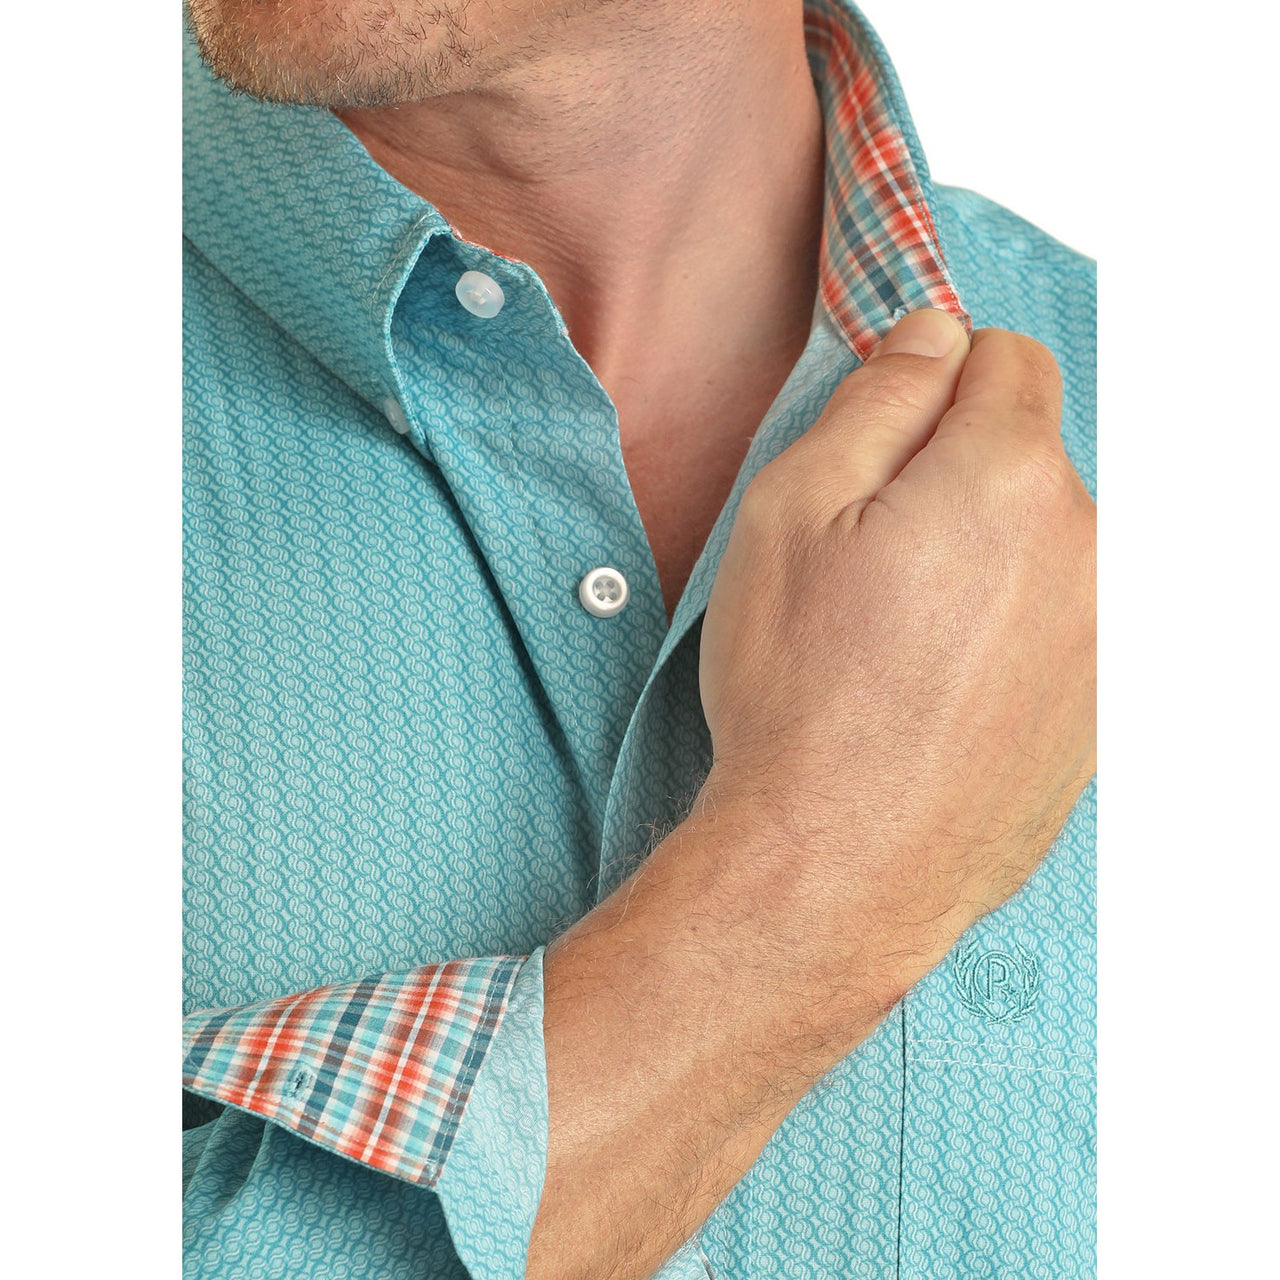 Panhandle Men's Long Sleeve 1 Pocket Button Down Shirt - Turquoise